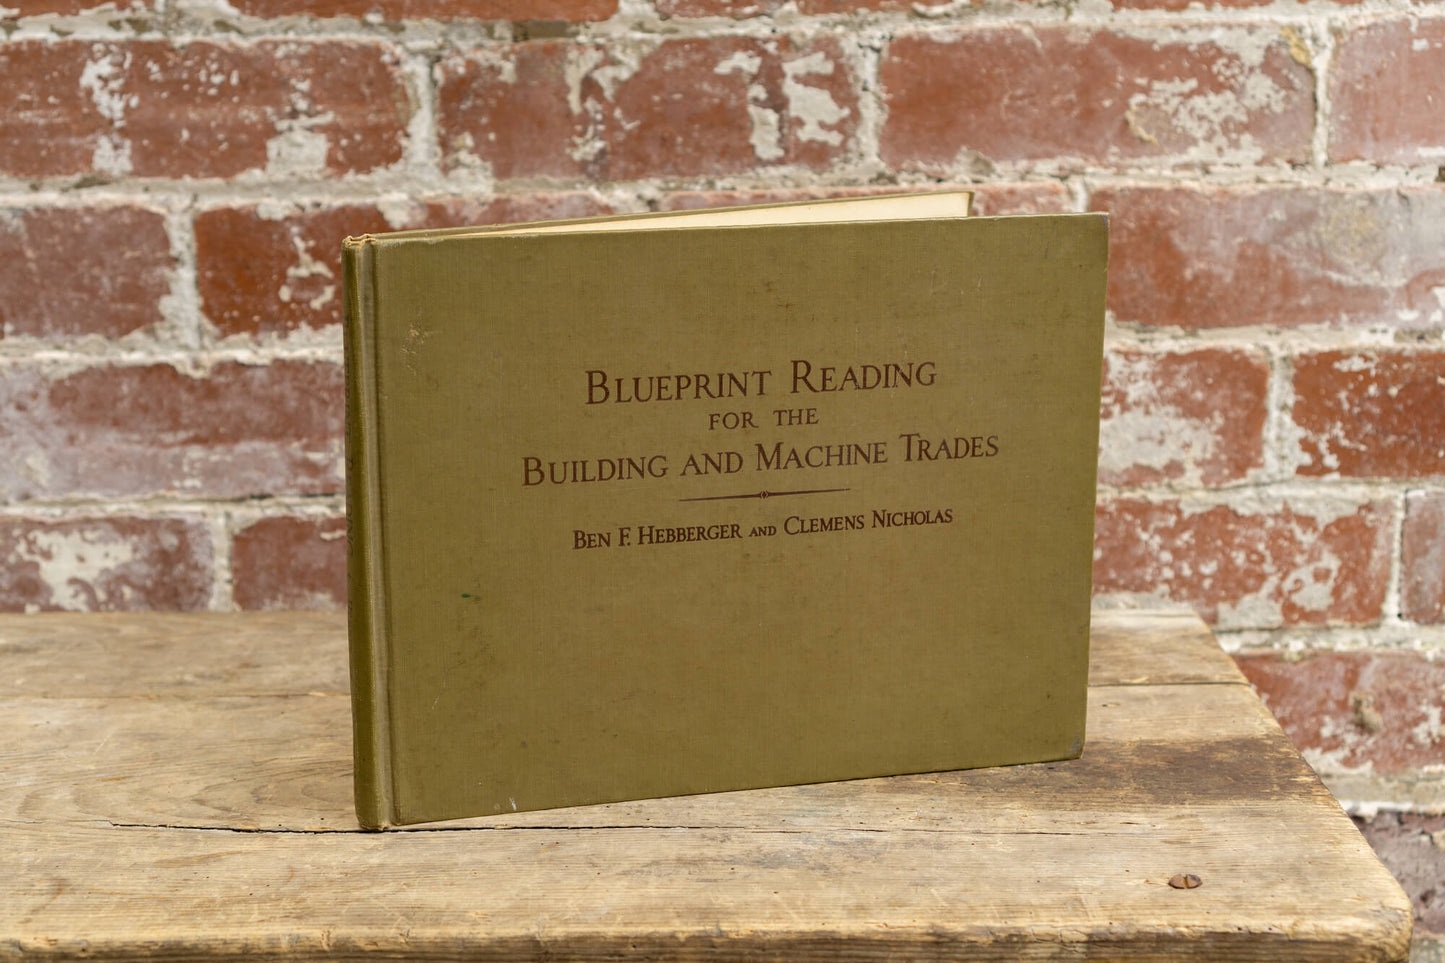 'Blueprint Reading for the Building and Machine Trades' Book